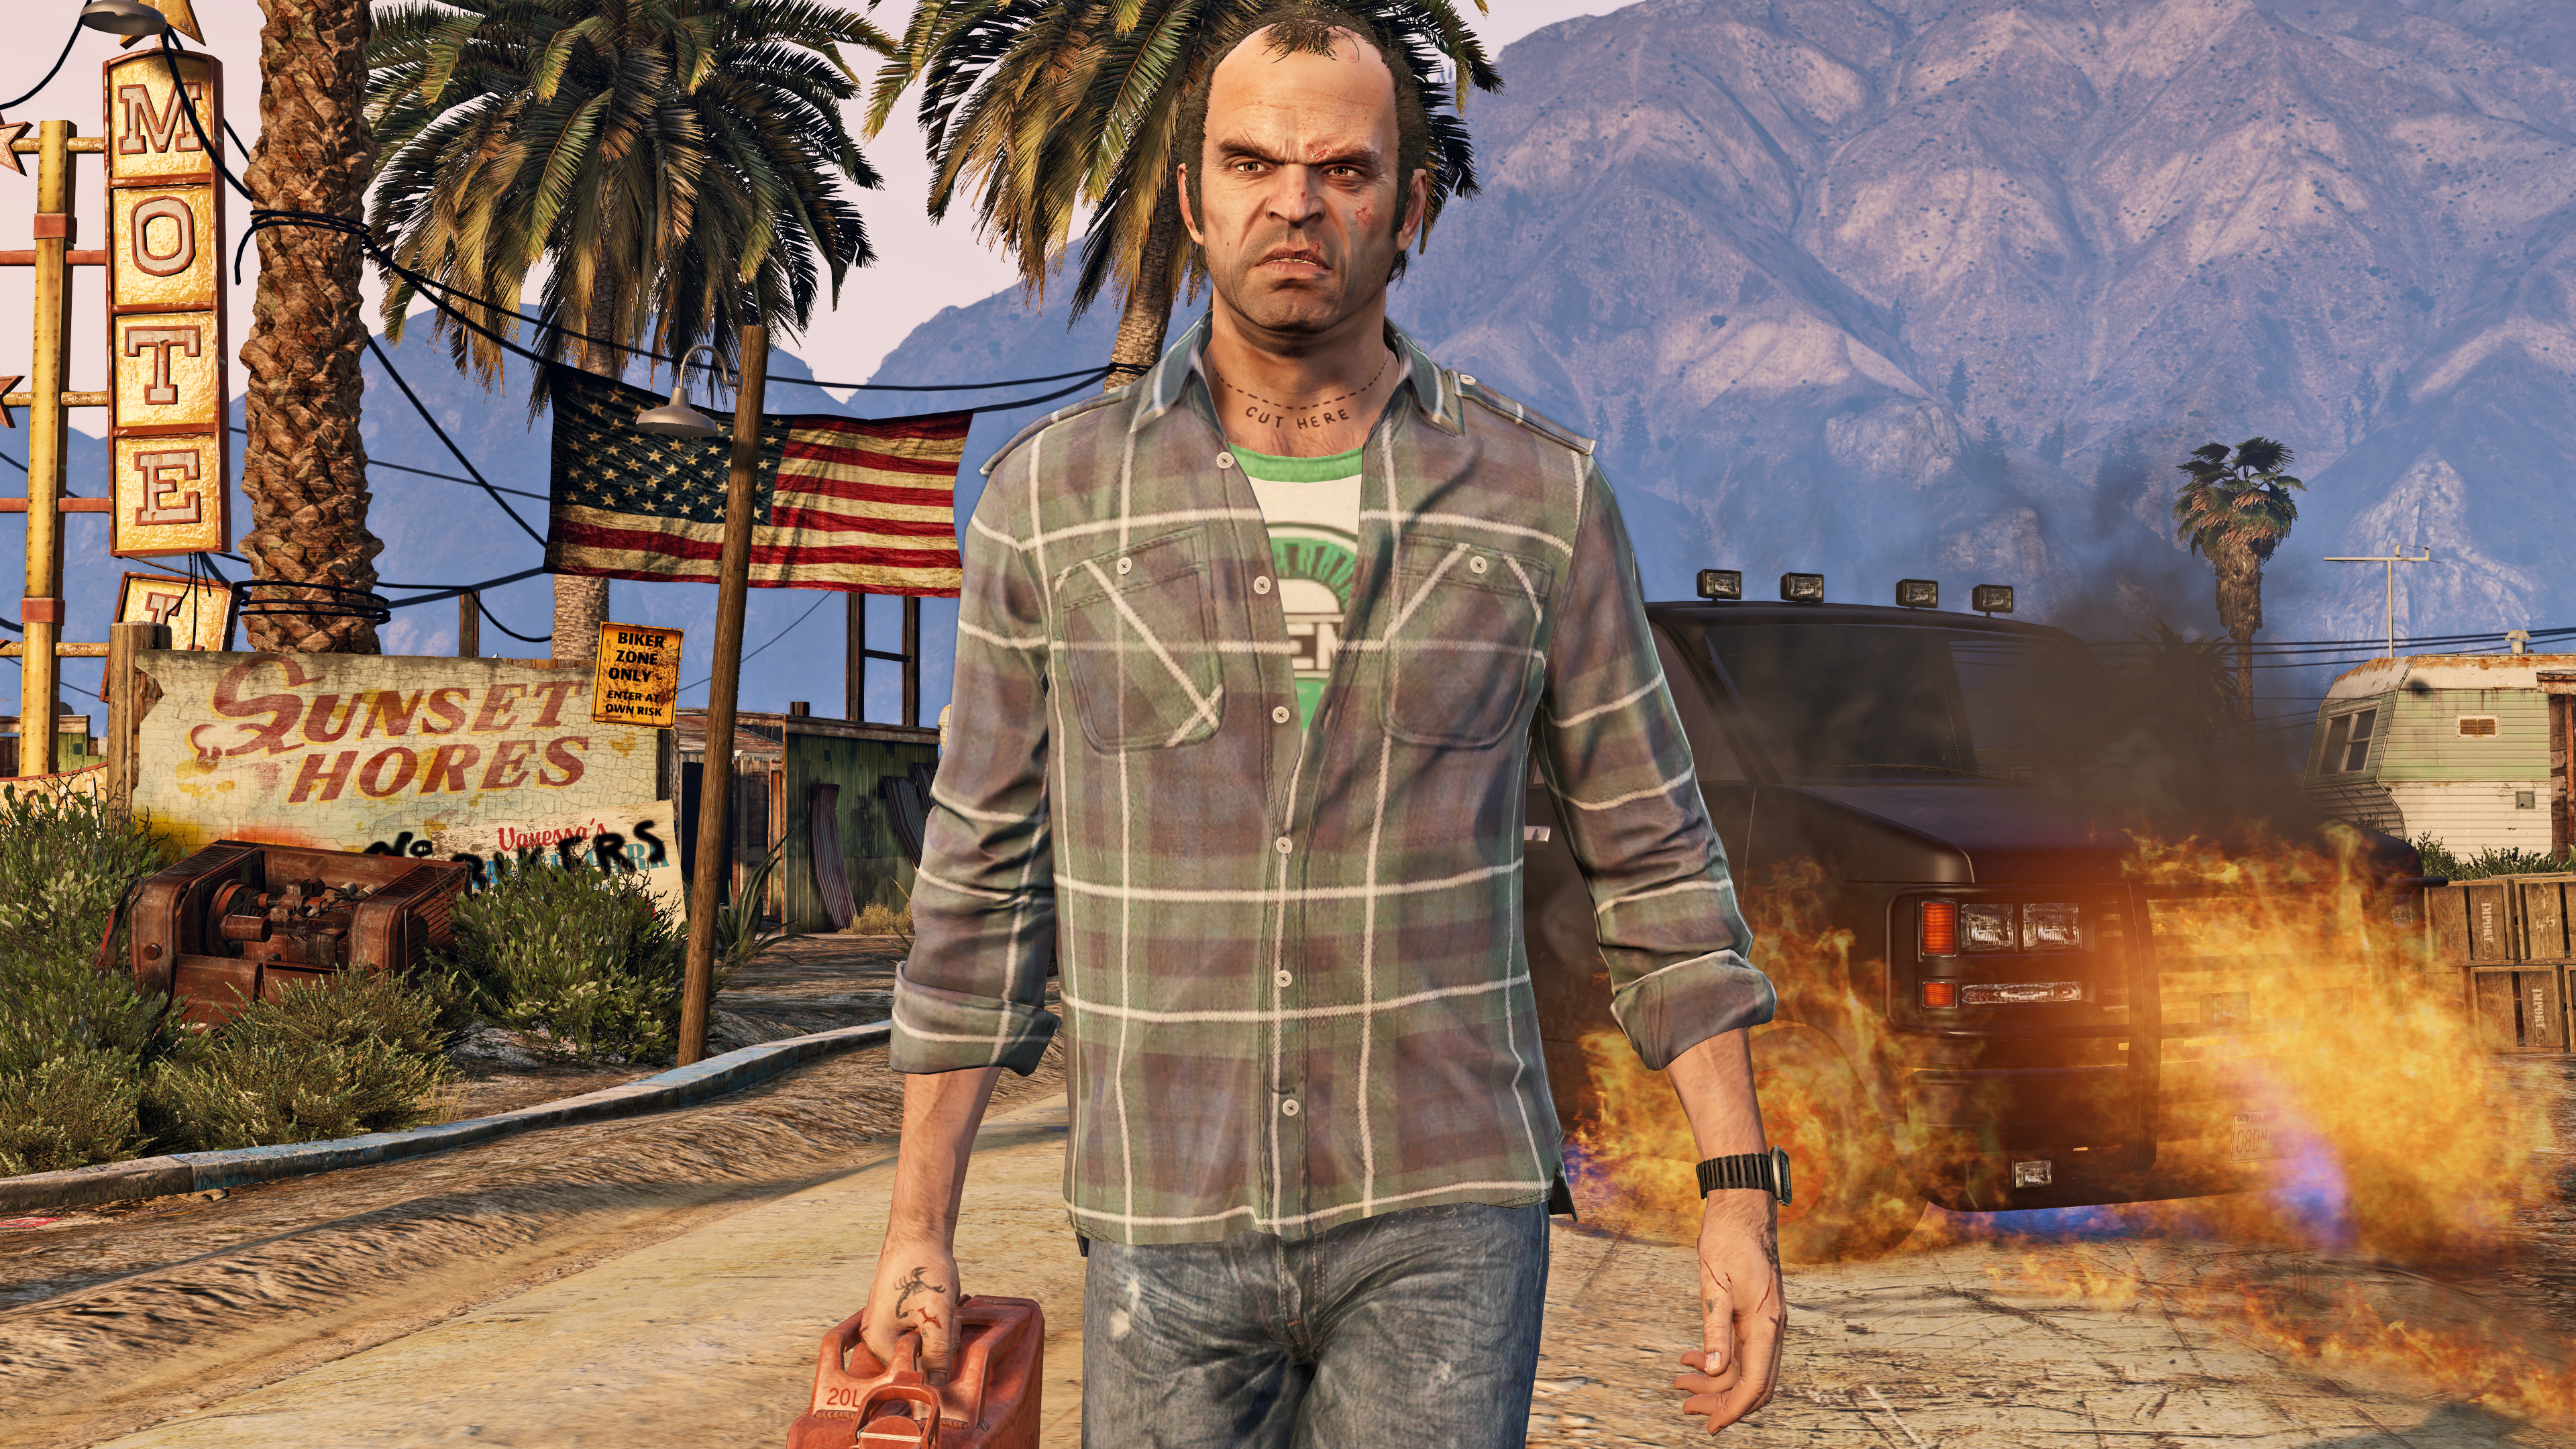 Controversial History of Rockstar Games — Eightify